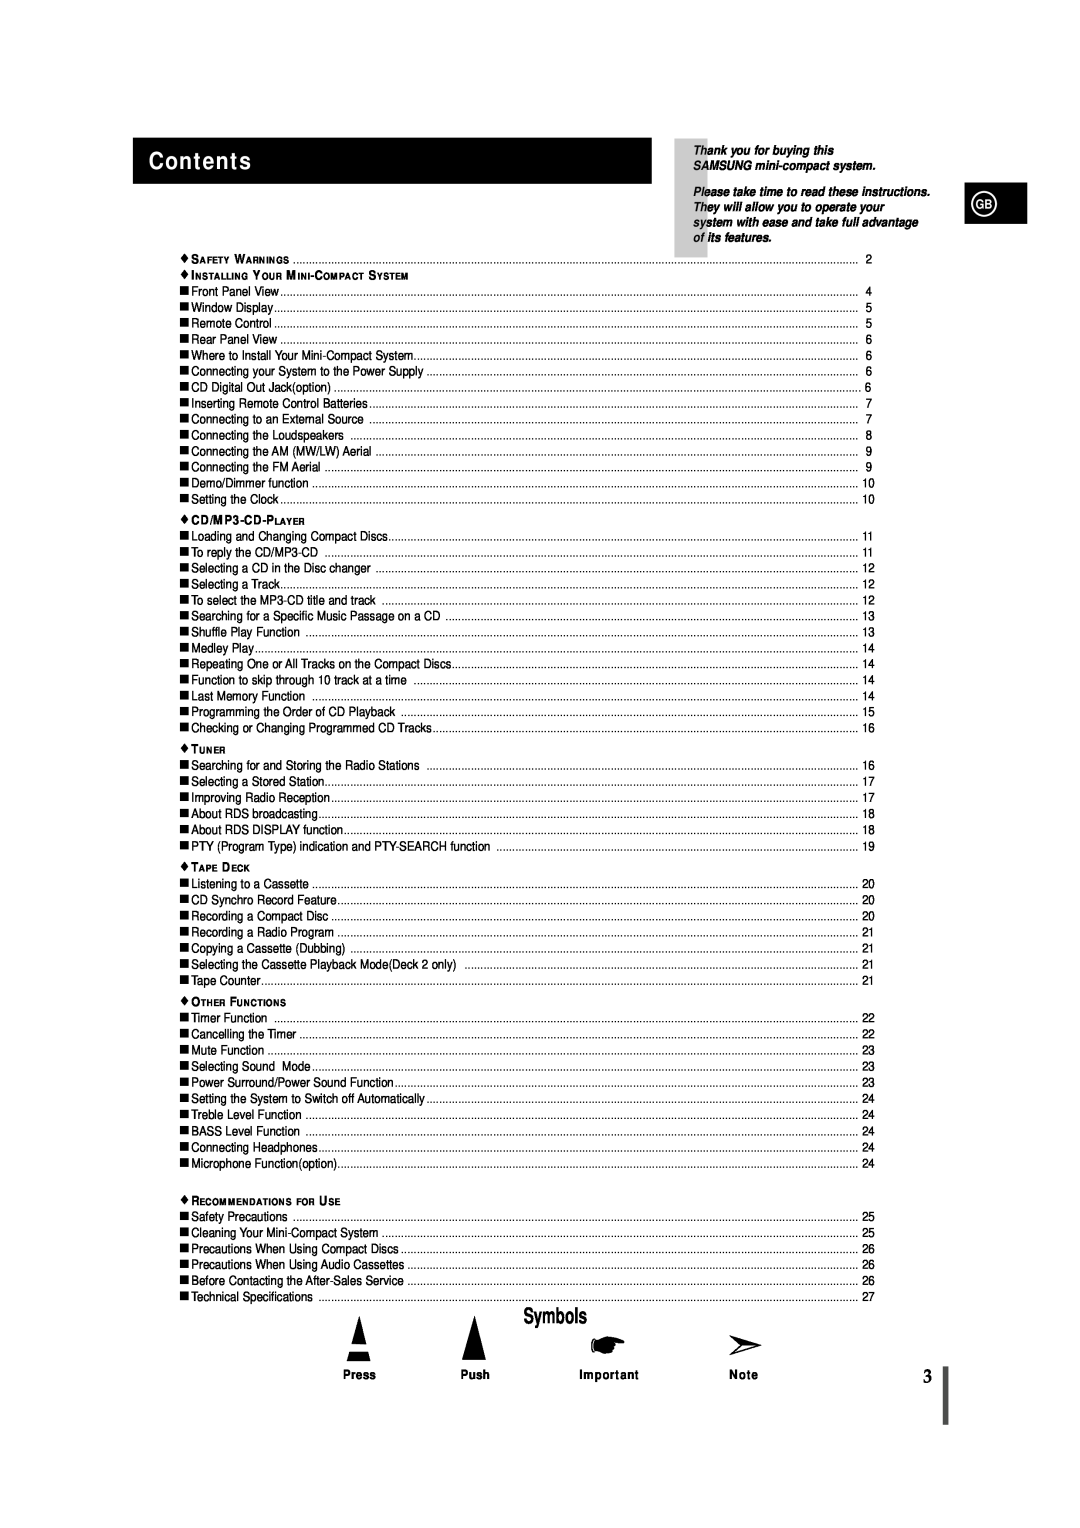 Samsung MAXZJ650RH/ELS manual Contents, Symbols, Thank you for buying this, SAMSUNG mini-compact system, of its features 